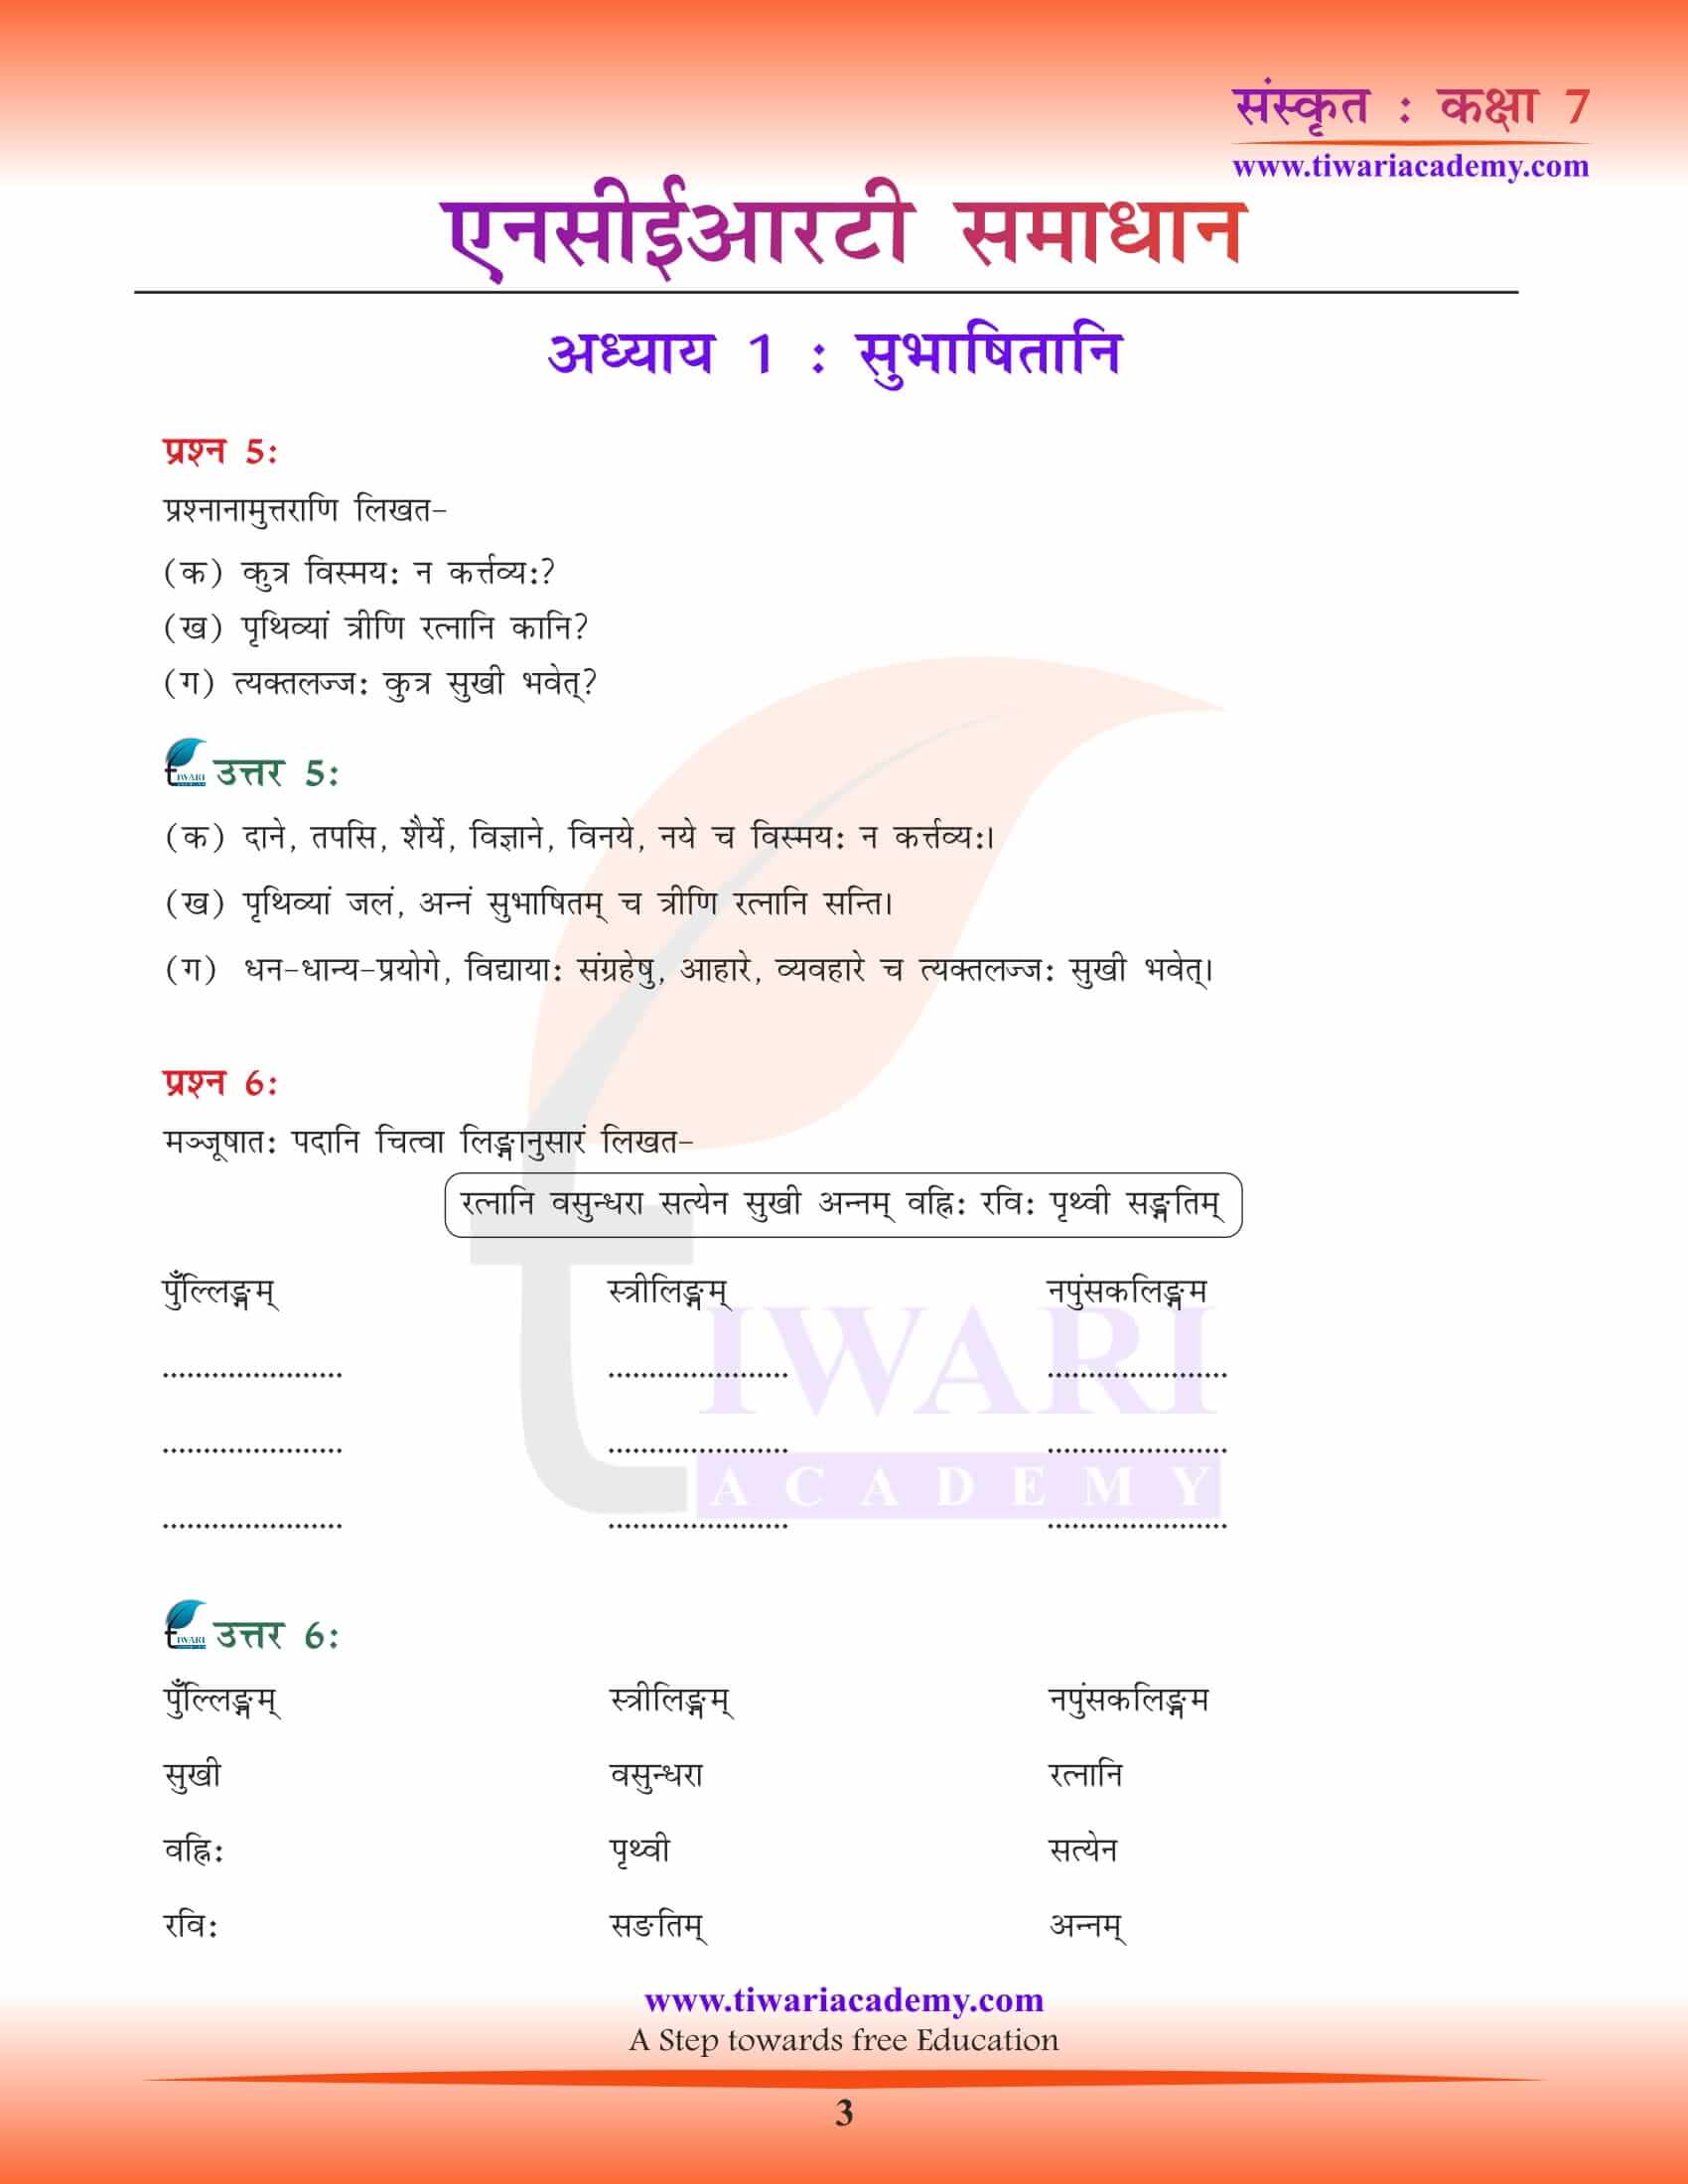 NCERT Solutions for Class 7 Sanskrit Chapter 1 answers